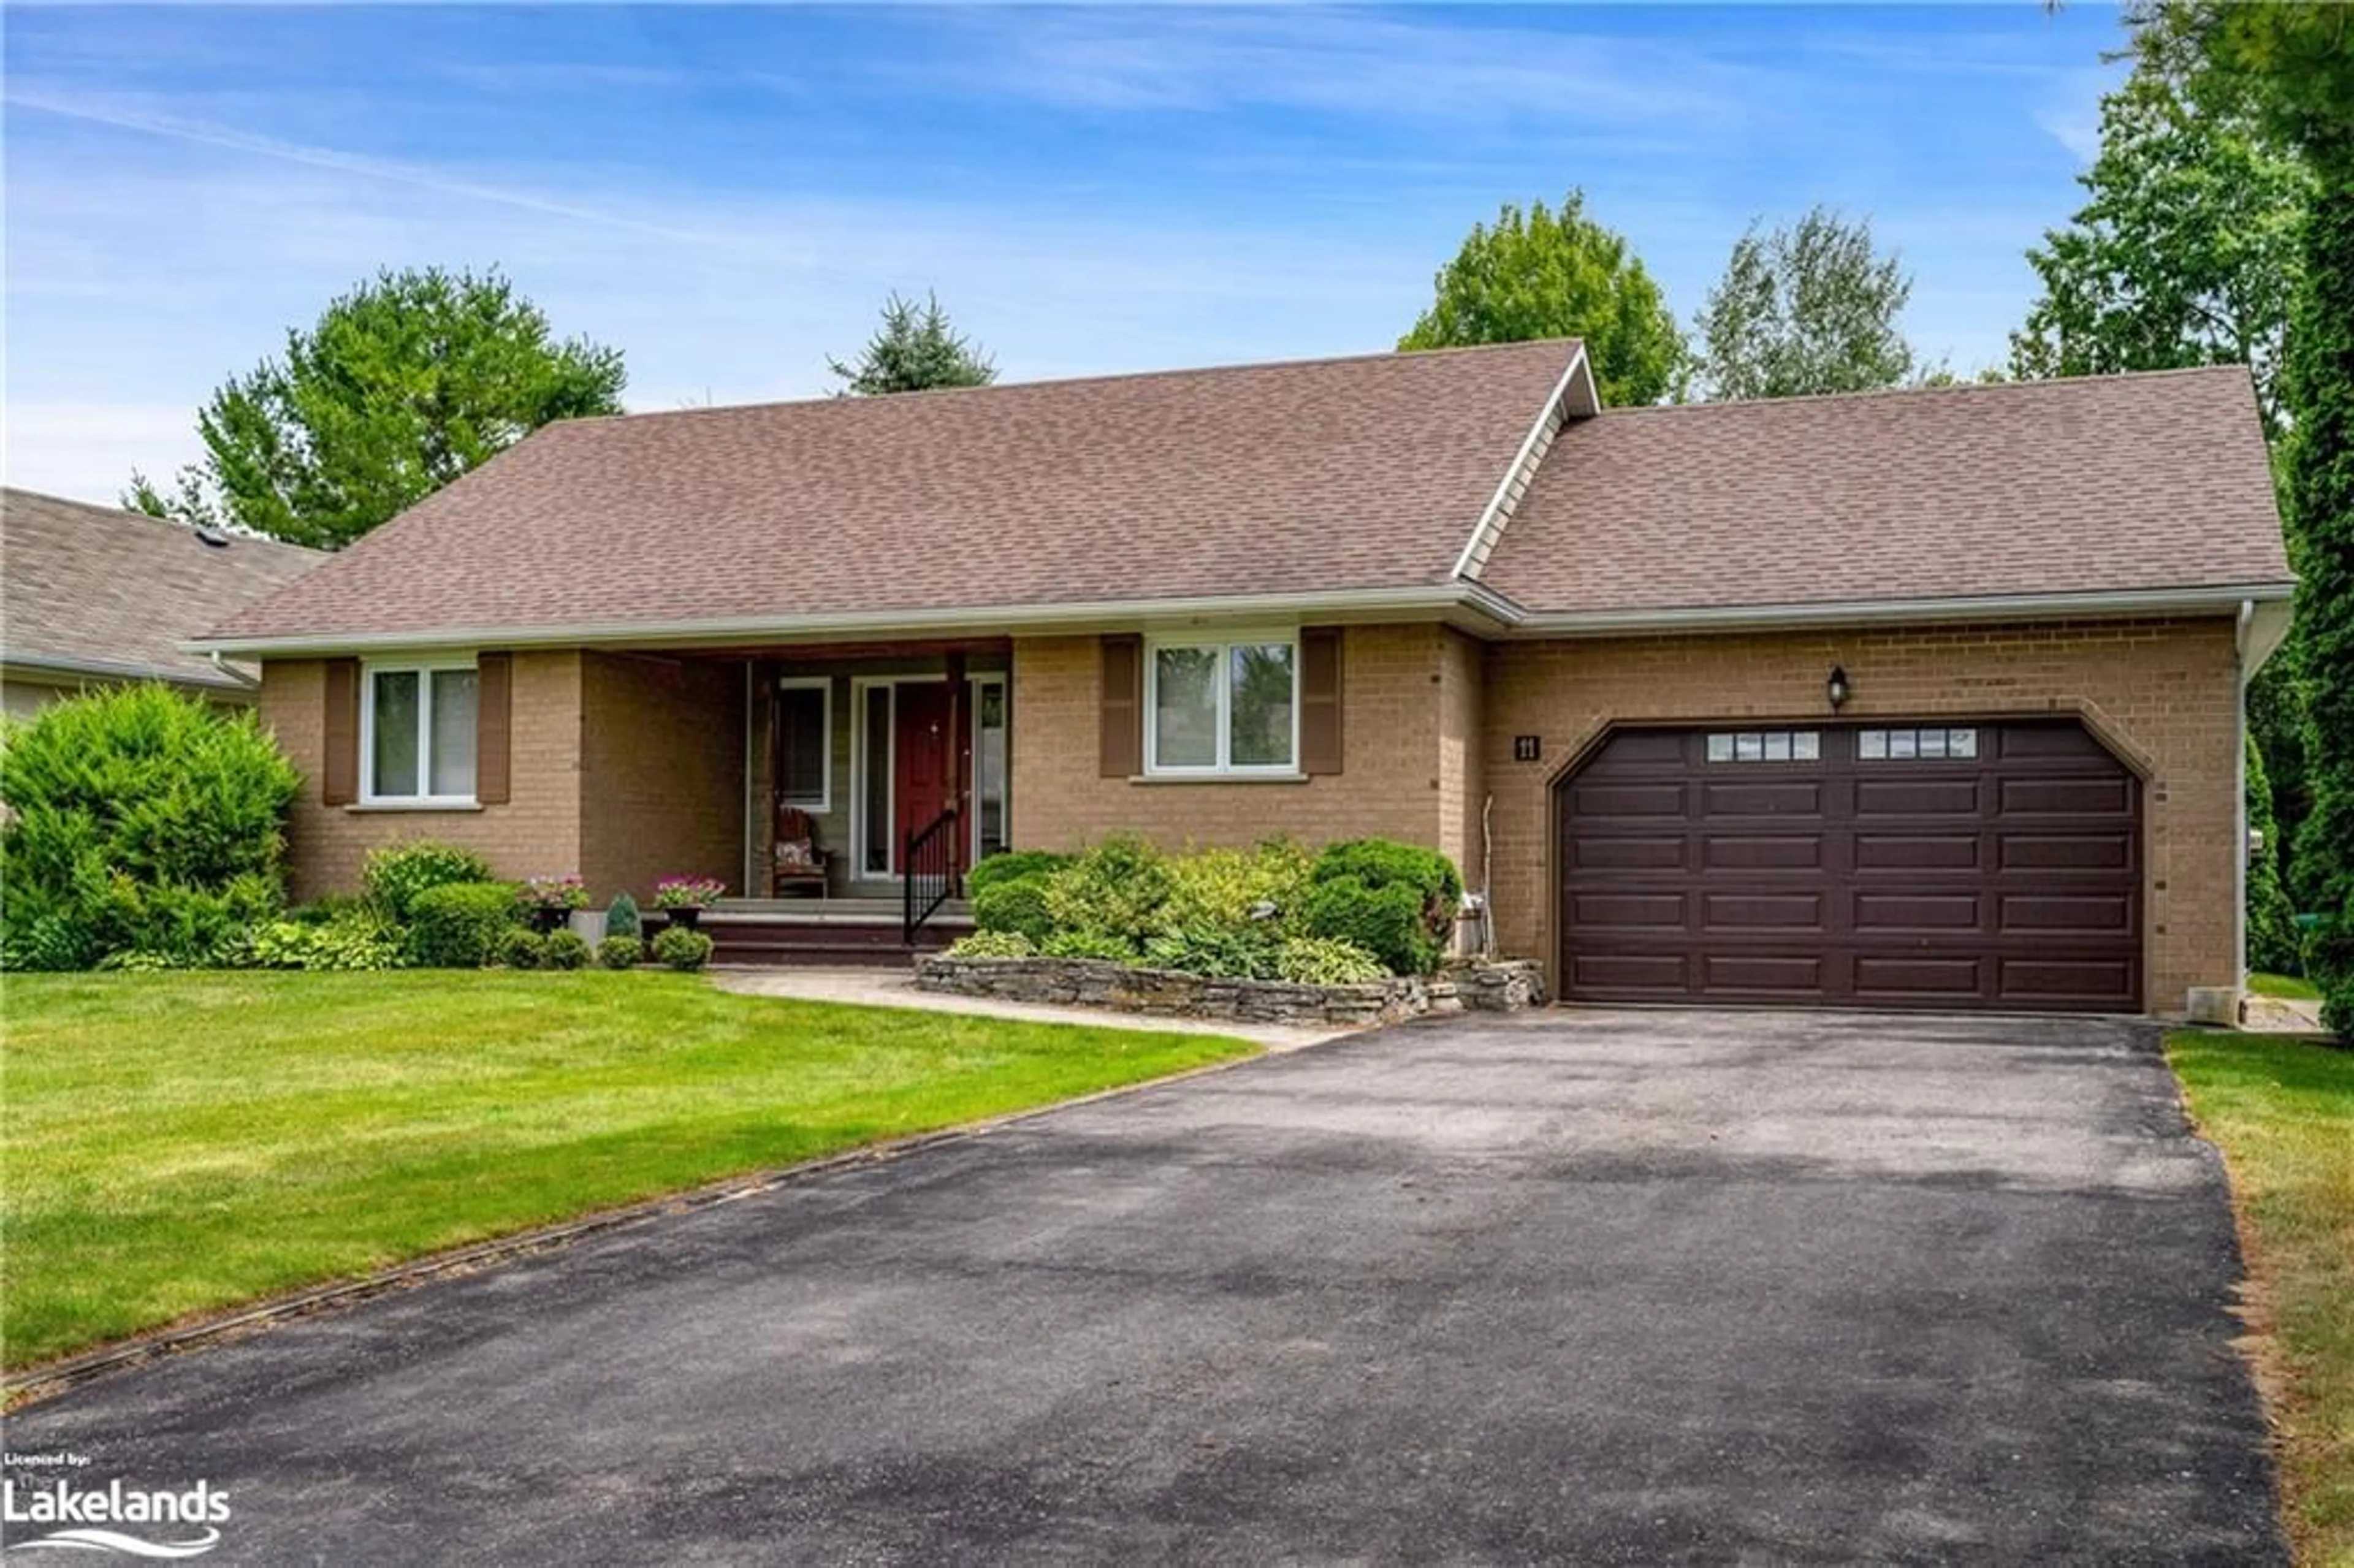 Home with brick exterior material for 11 Wickens Lane, Thornbury Ontario N0H 2P0